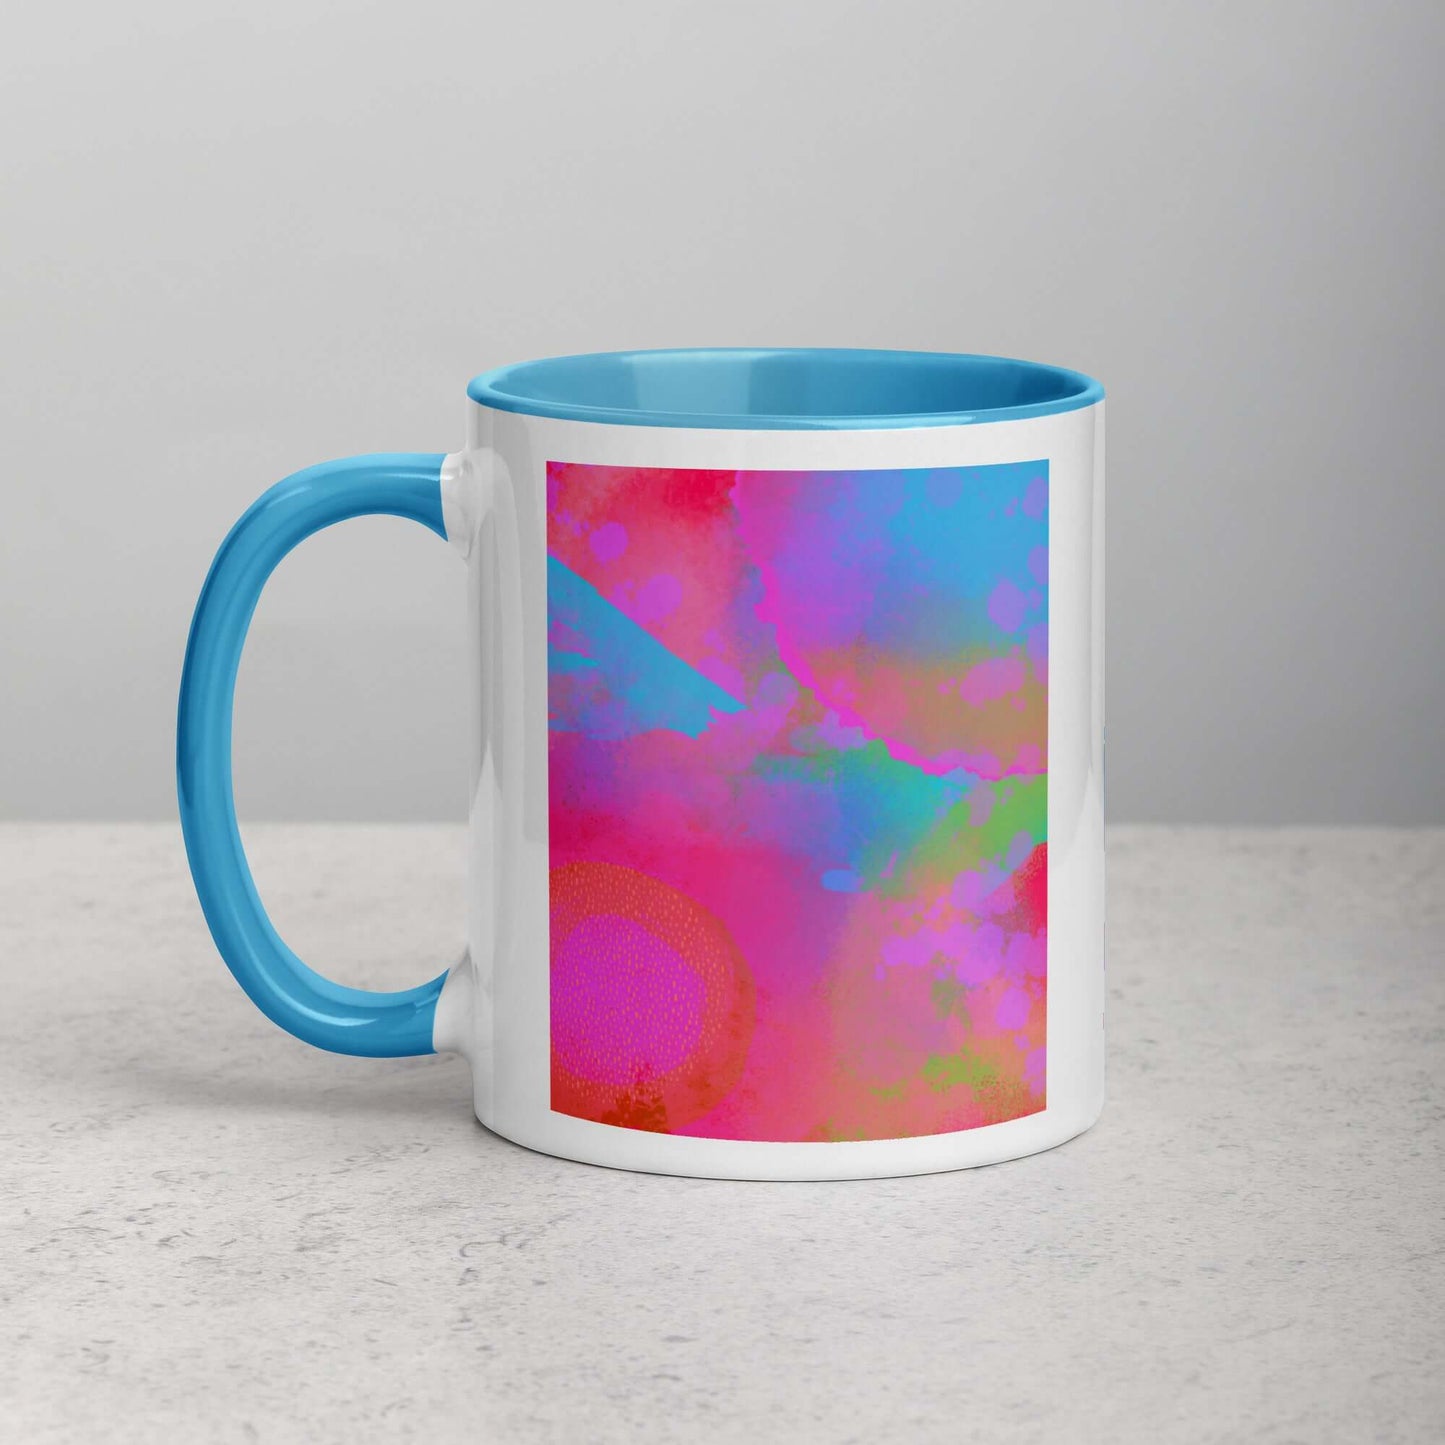 Hot Pink Intergalactic “Between Worlds” Abstract Art Mug with Light Blue Color Inside Left Handed Front View